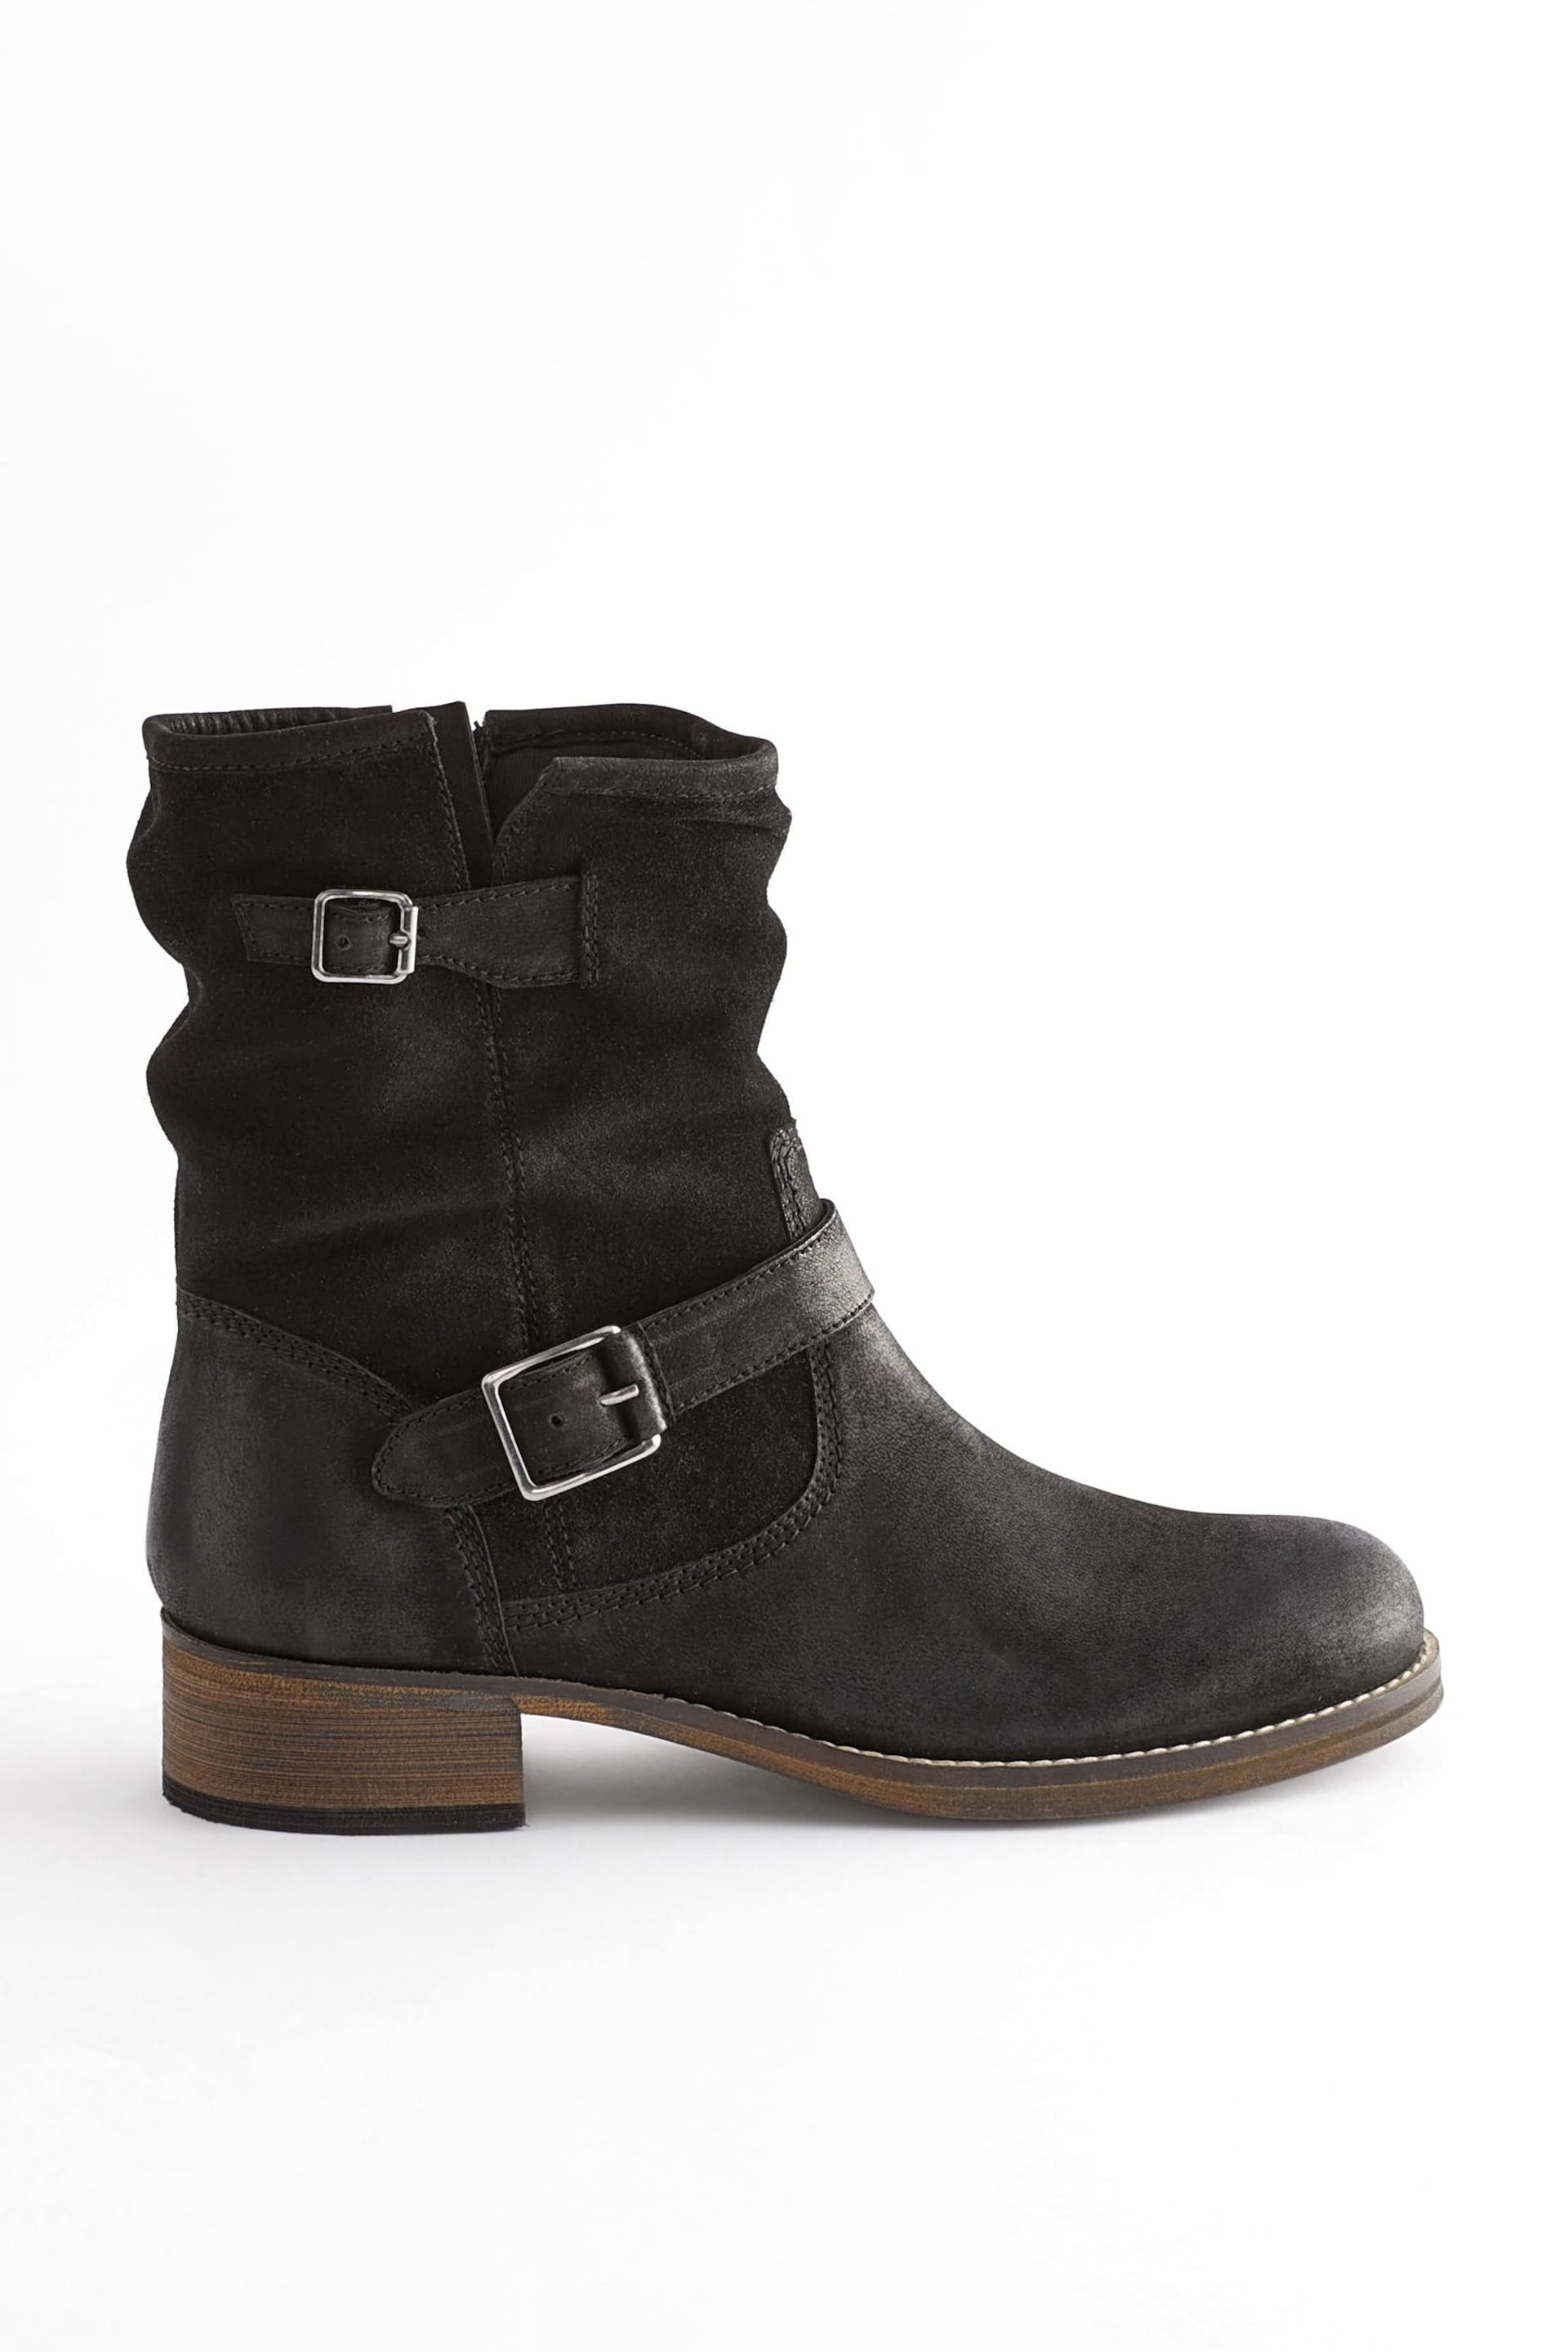 Black Regular/Wide Fit Forever Comfort® Leather Slouch Ankle Boots - Image 2 of 7